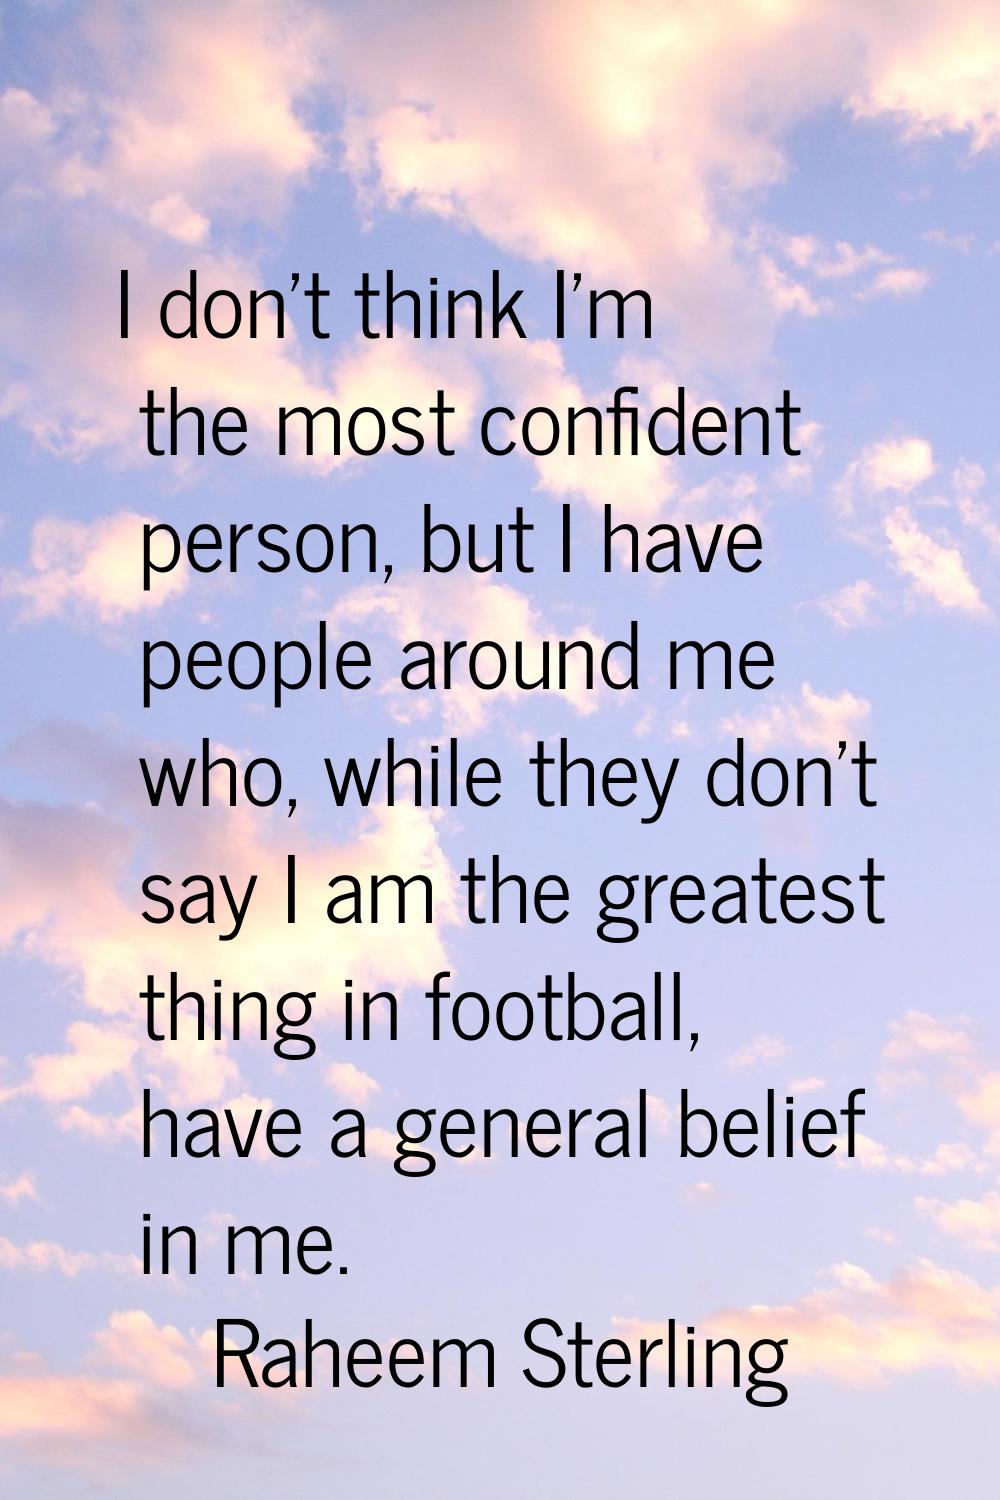 I don't think I'm the most confident person, but I have people around me who, while they don't say 